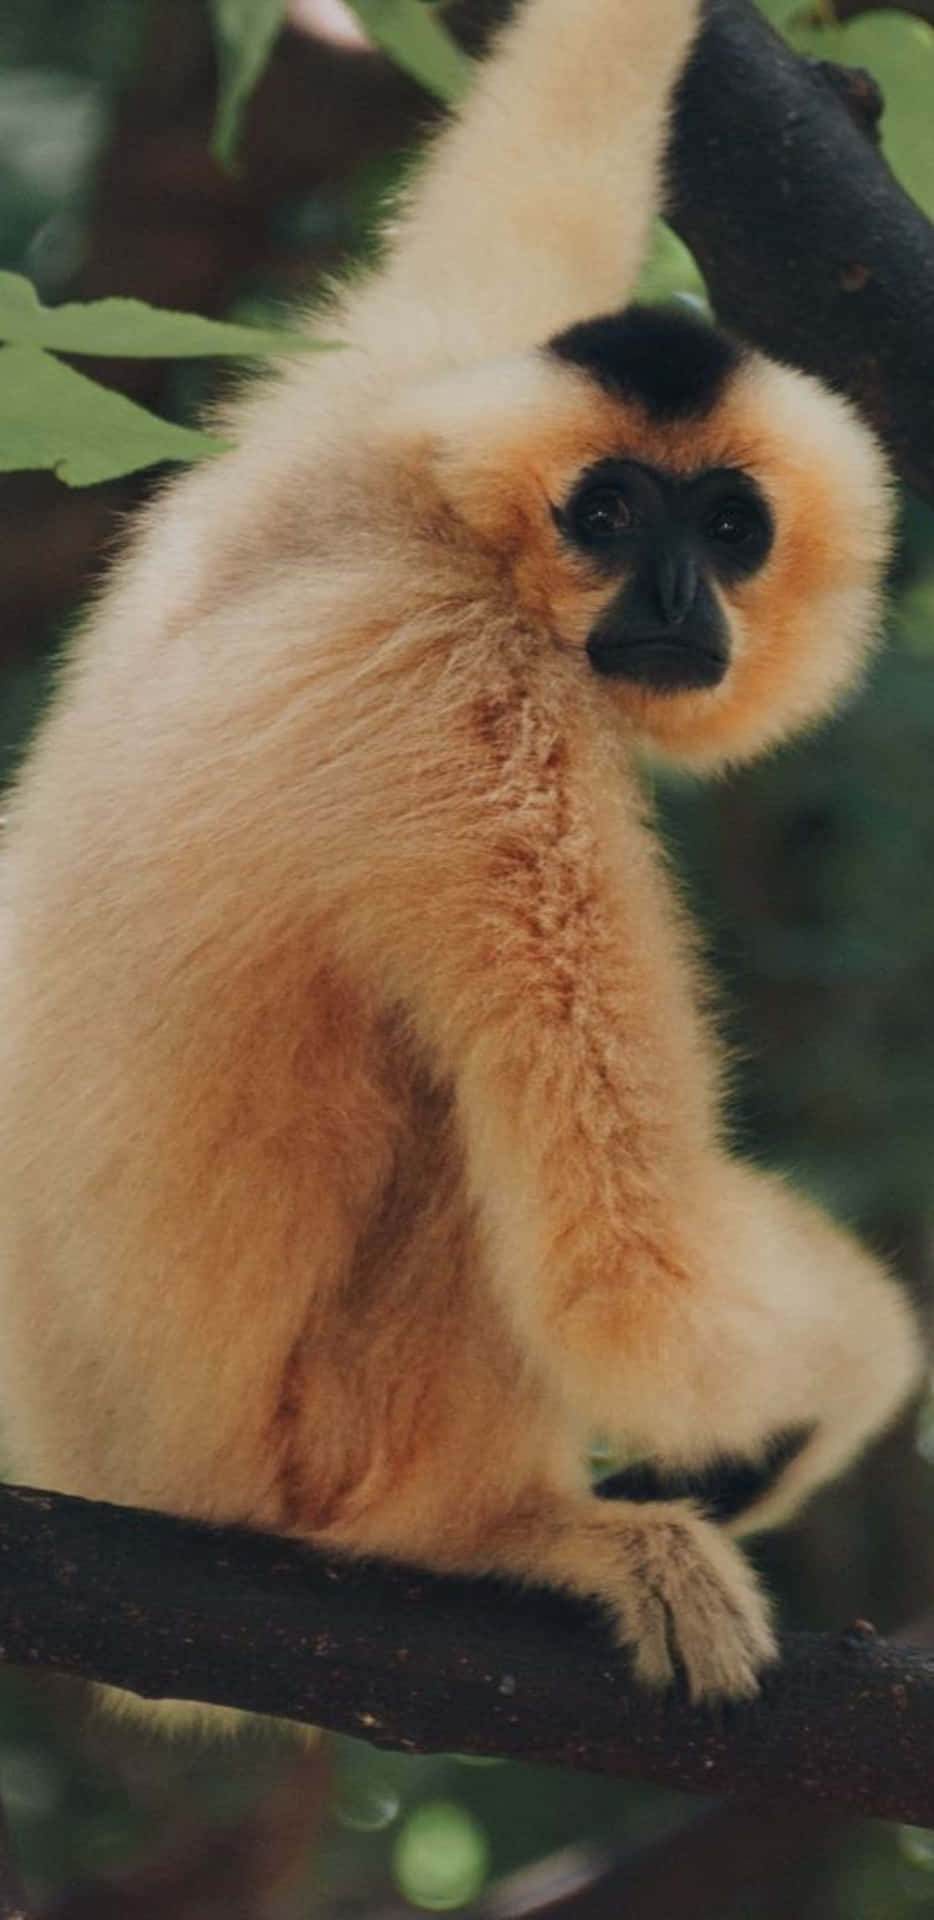 Up close and personal with a curious Gibbon on the Pixel 3xl.